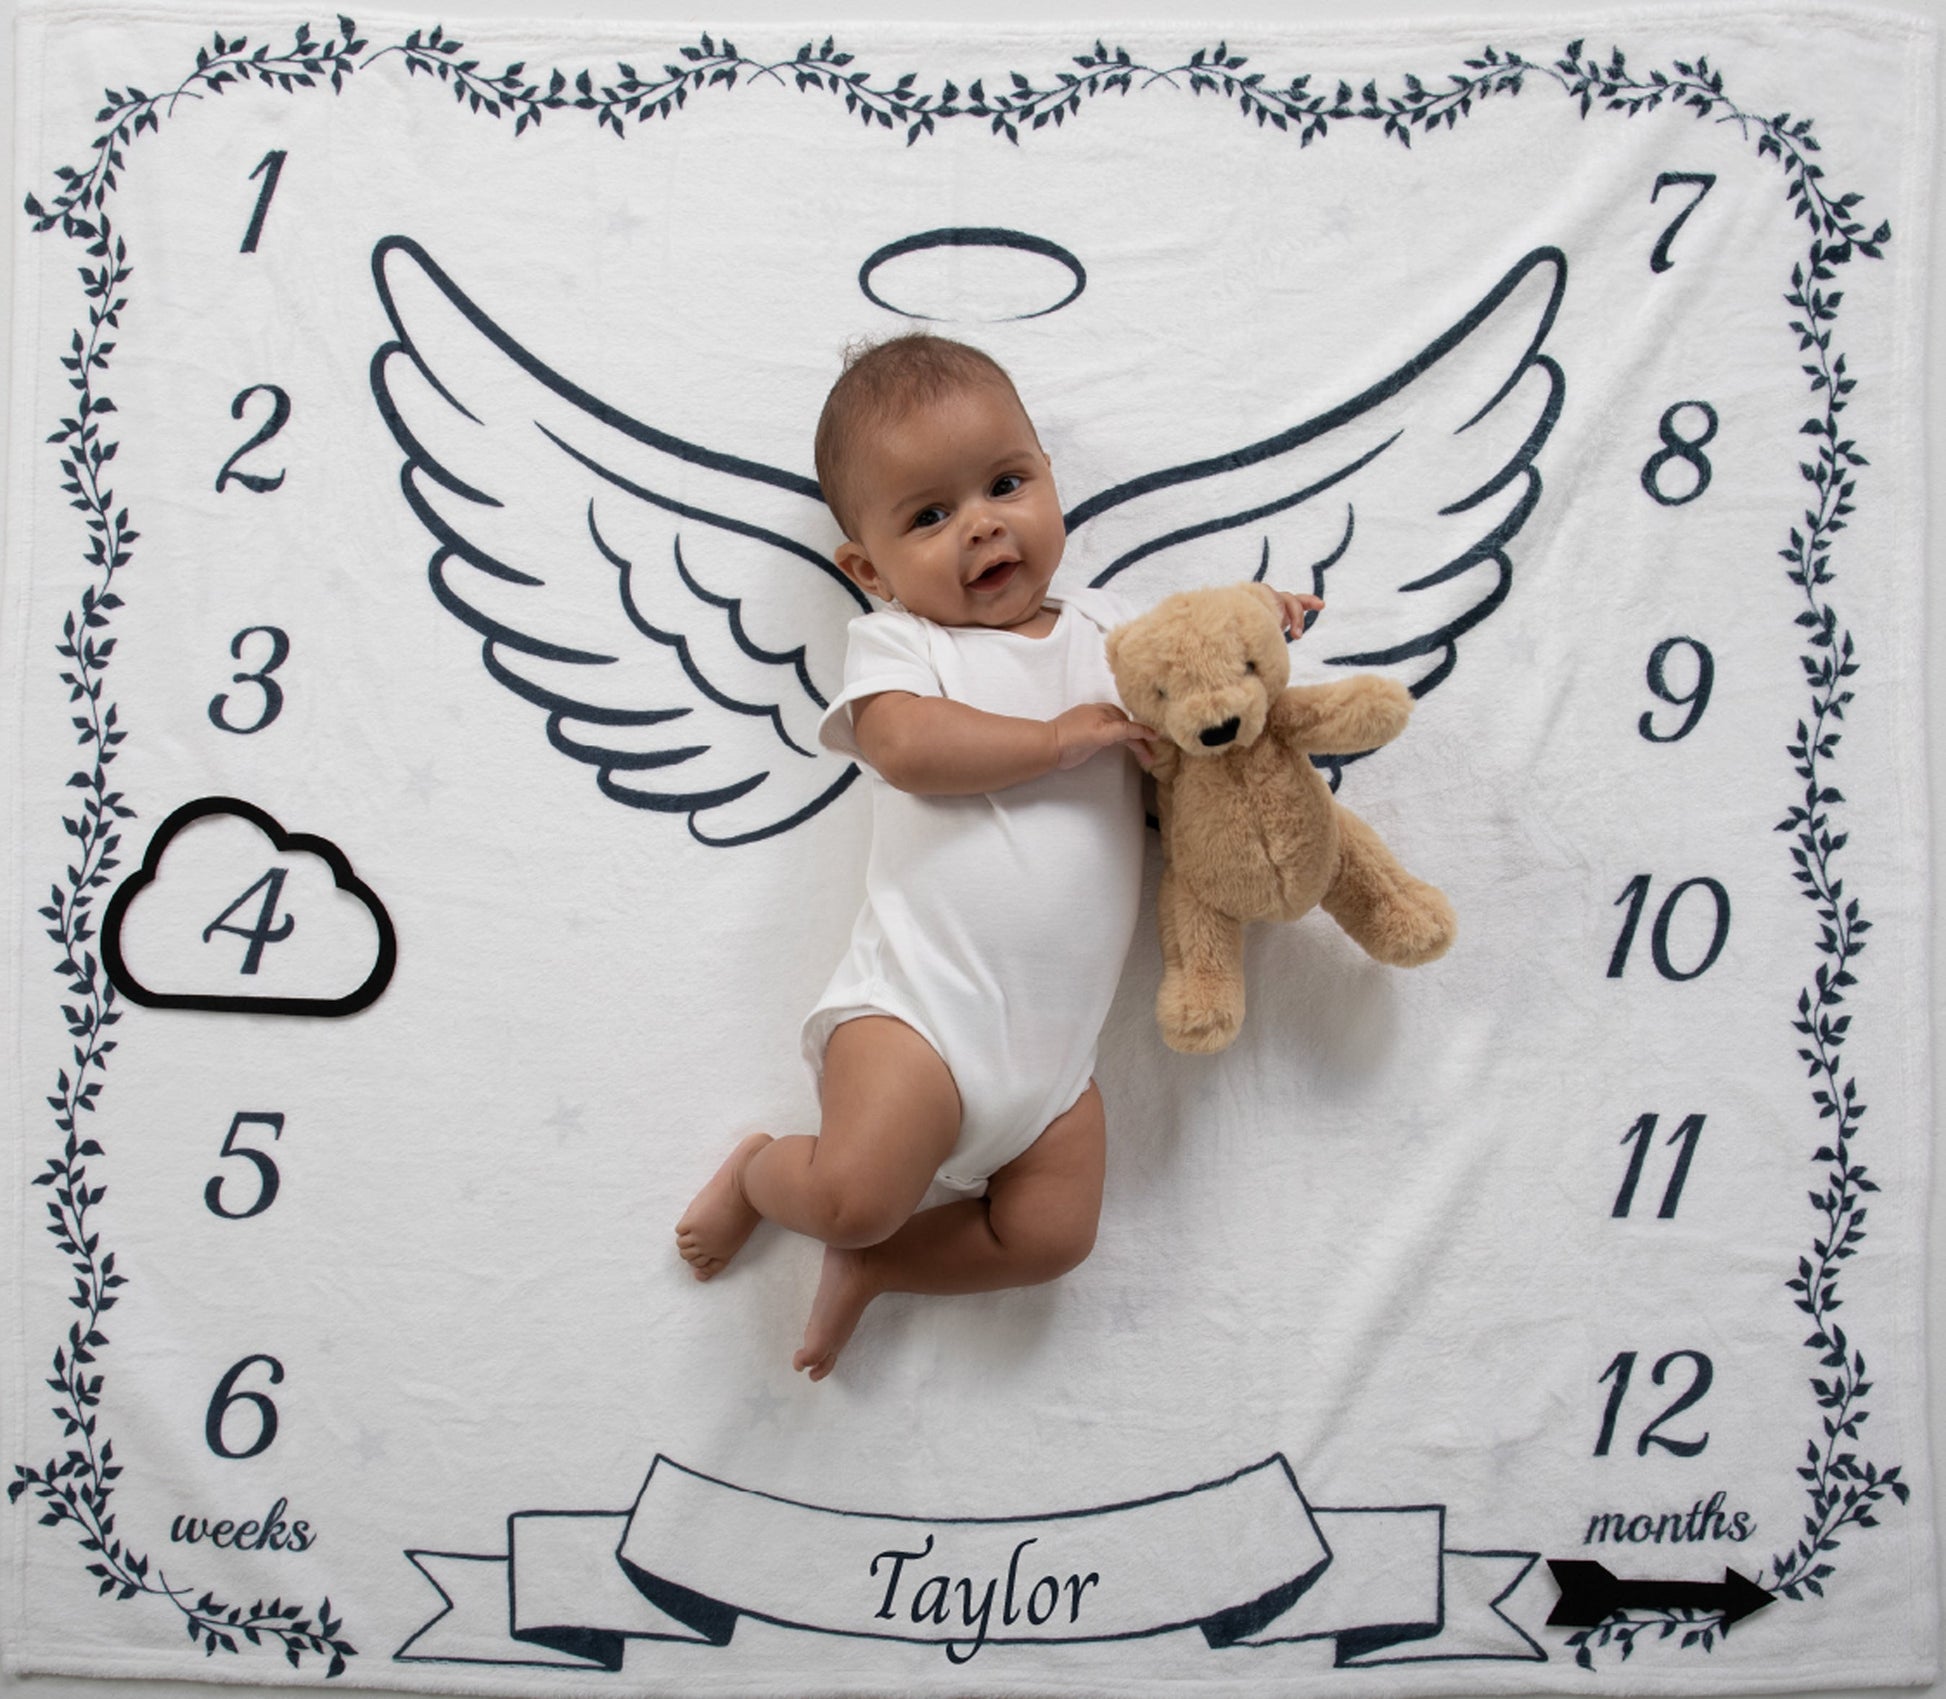 Capture the magic of your baby's growth with our soft and adorable heavenly dreams milestone blanket. Crafted from plush, high-quality material, this blanket features a whimsical angel wings and halo design that makes it perfect for monthly photo sessions. Watch your little one grow, and create a heartwarming keepsake of their first year.